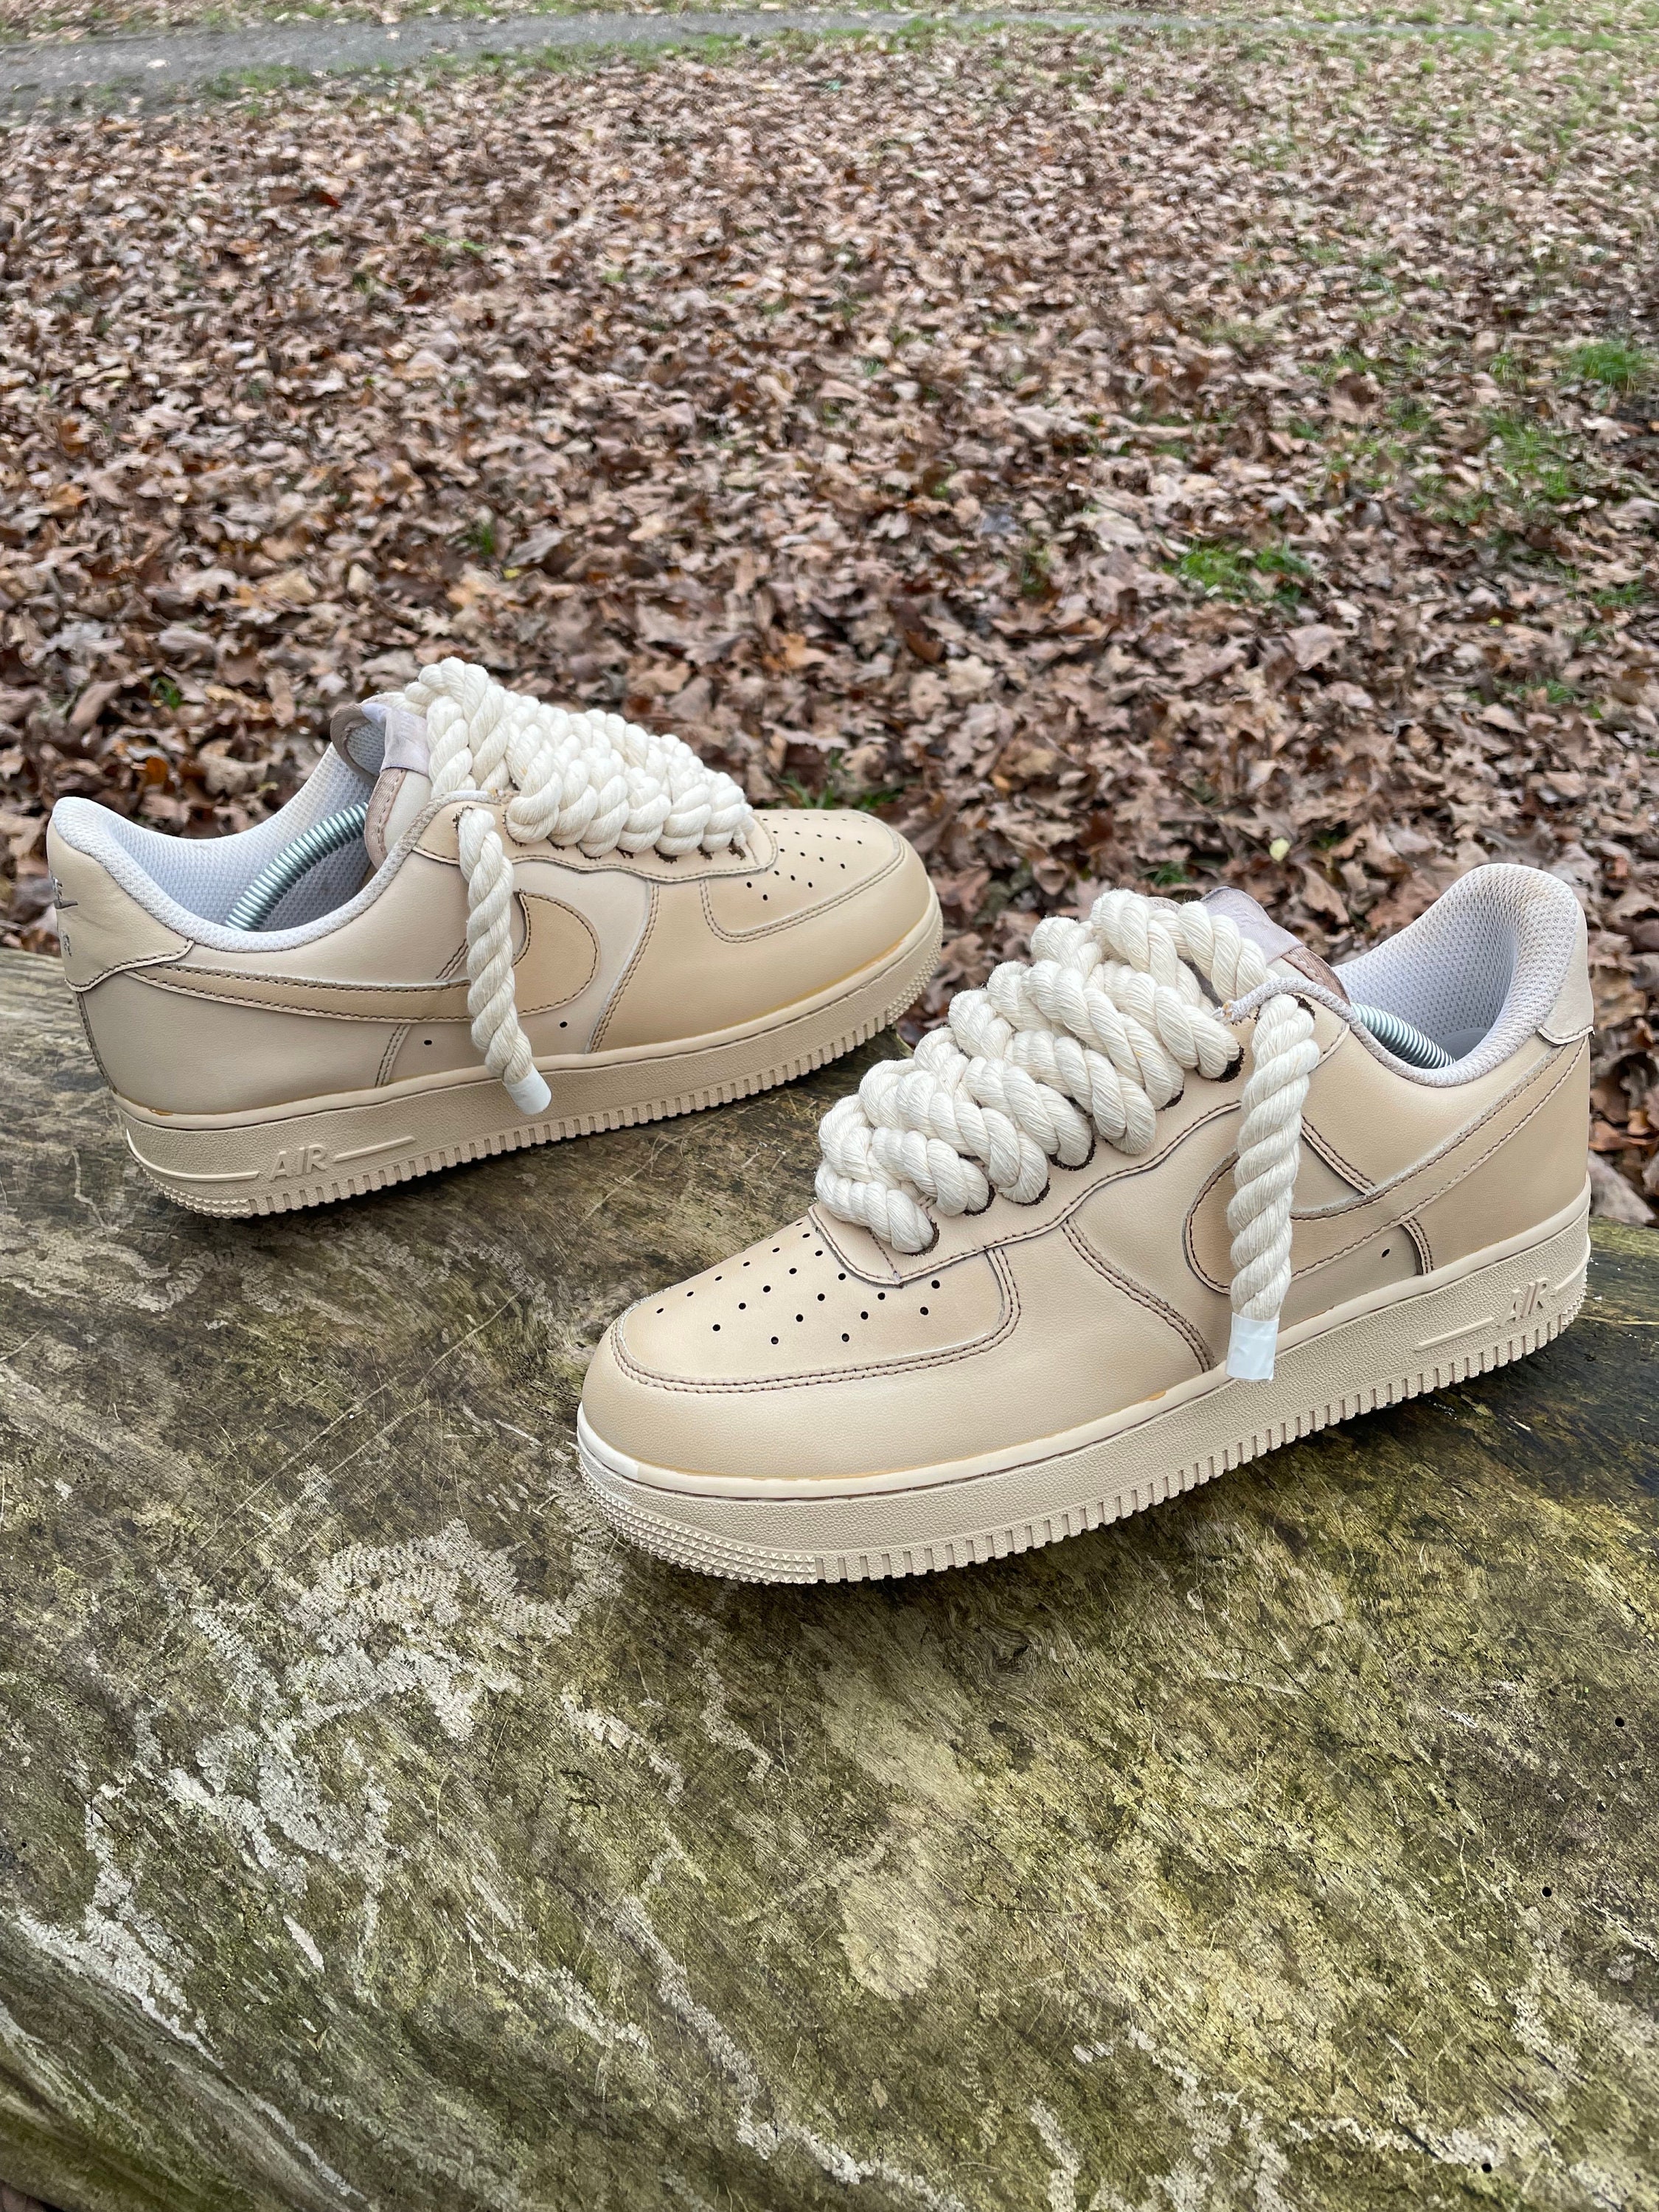 AF1 Thick Rope Shoe Laces Travis SB Dunk AJ off White Braided Shoelaces  Fashion Sneakers Style 